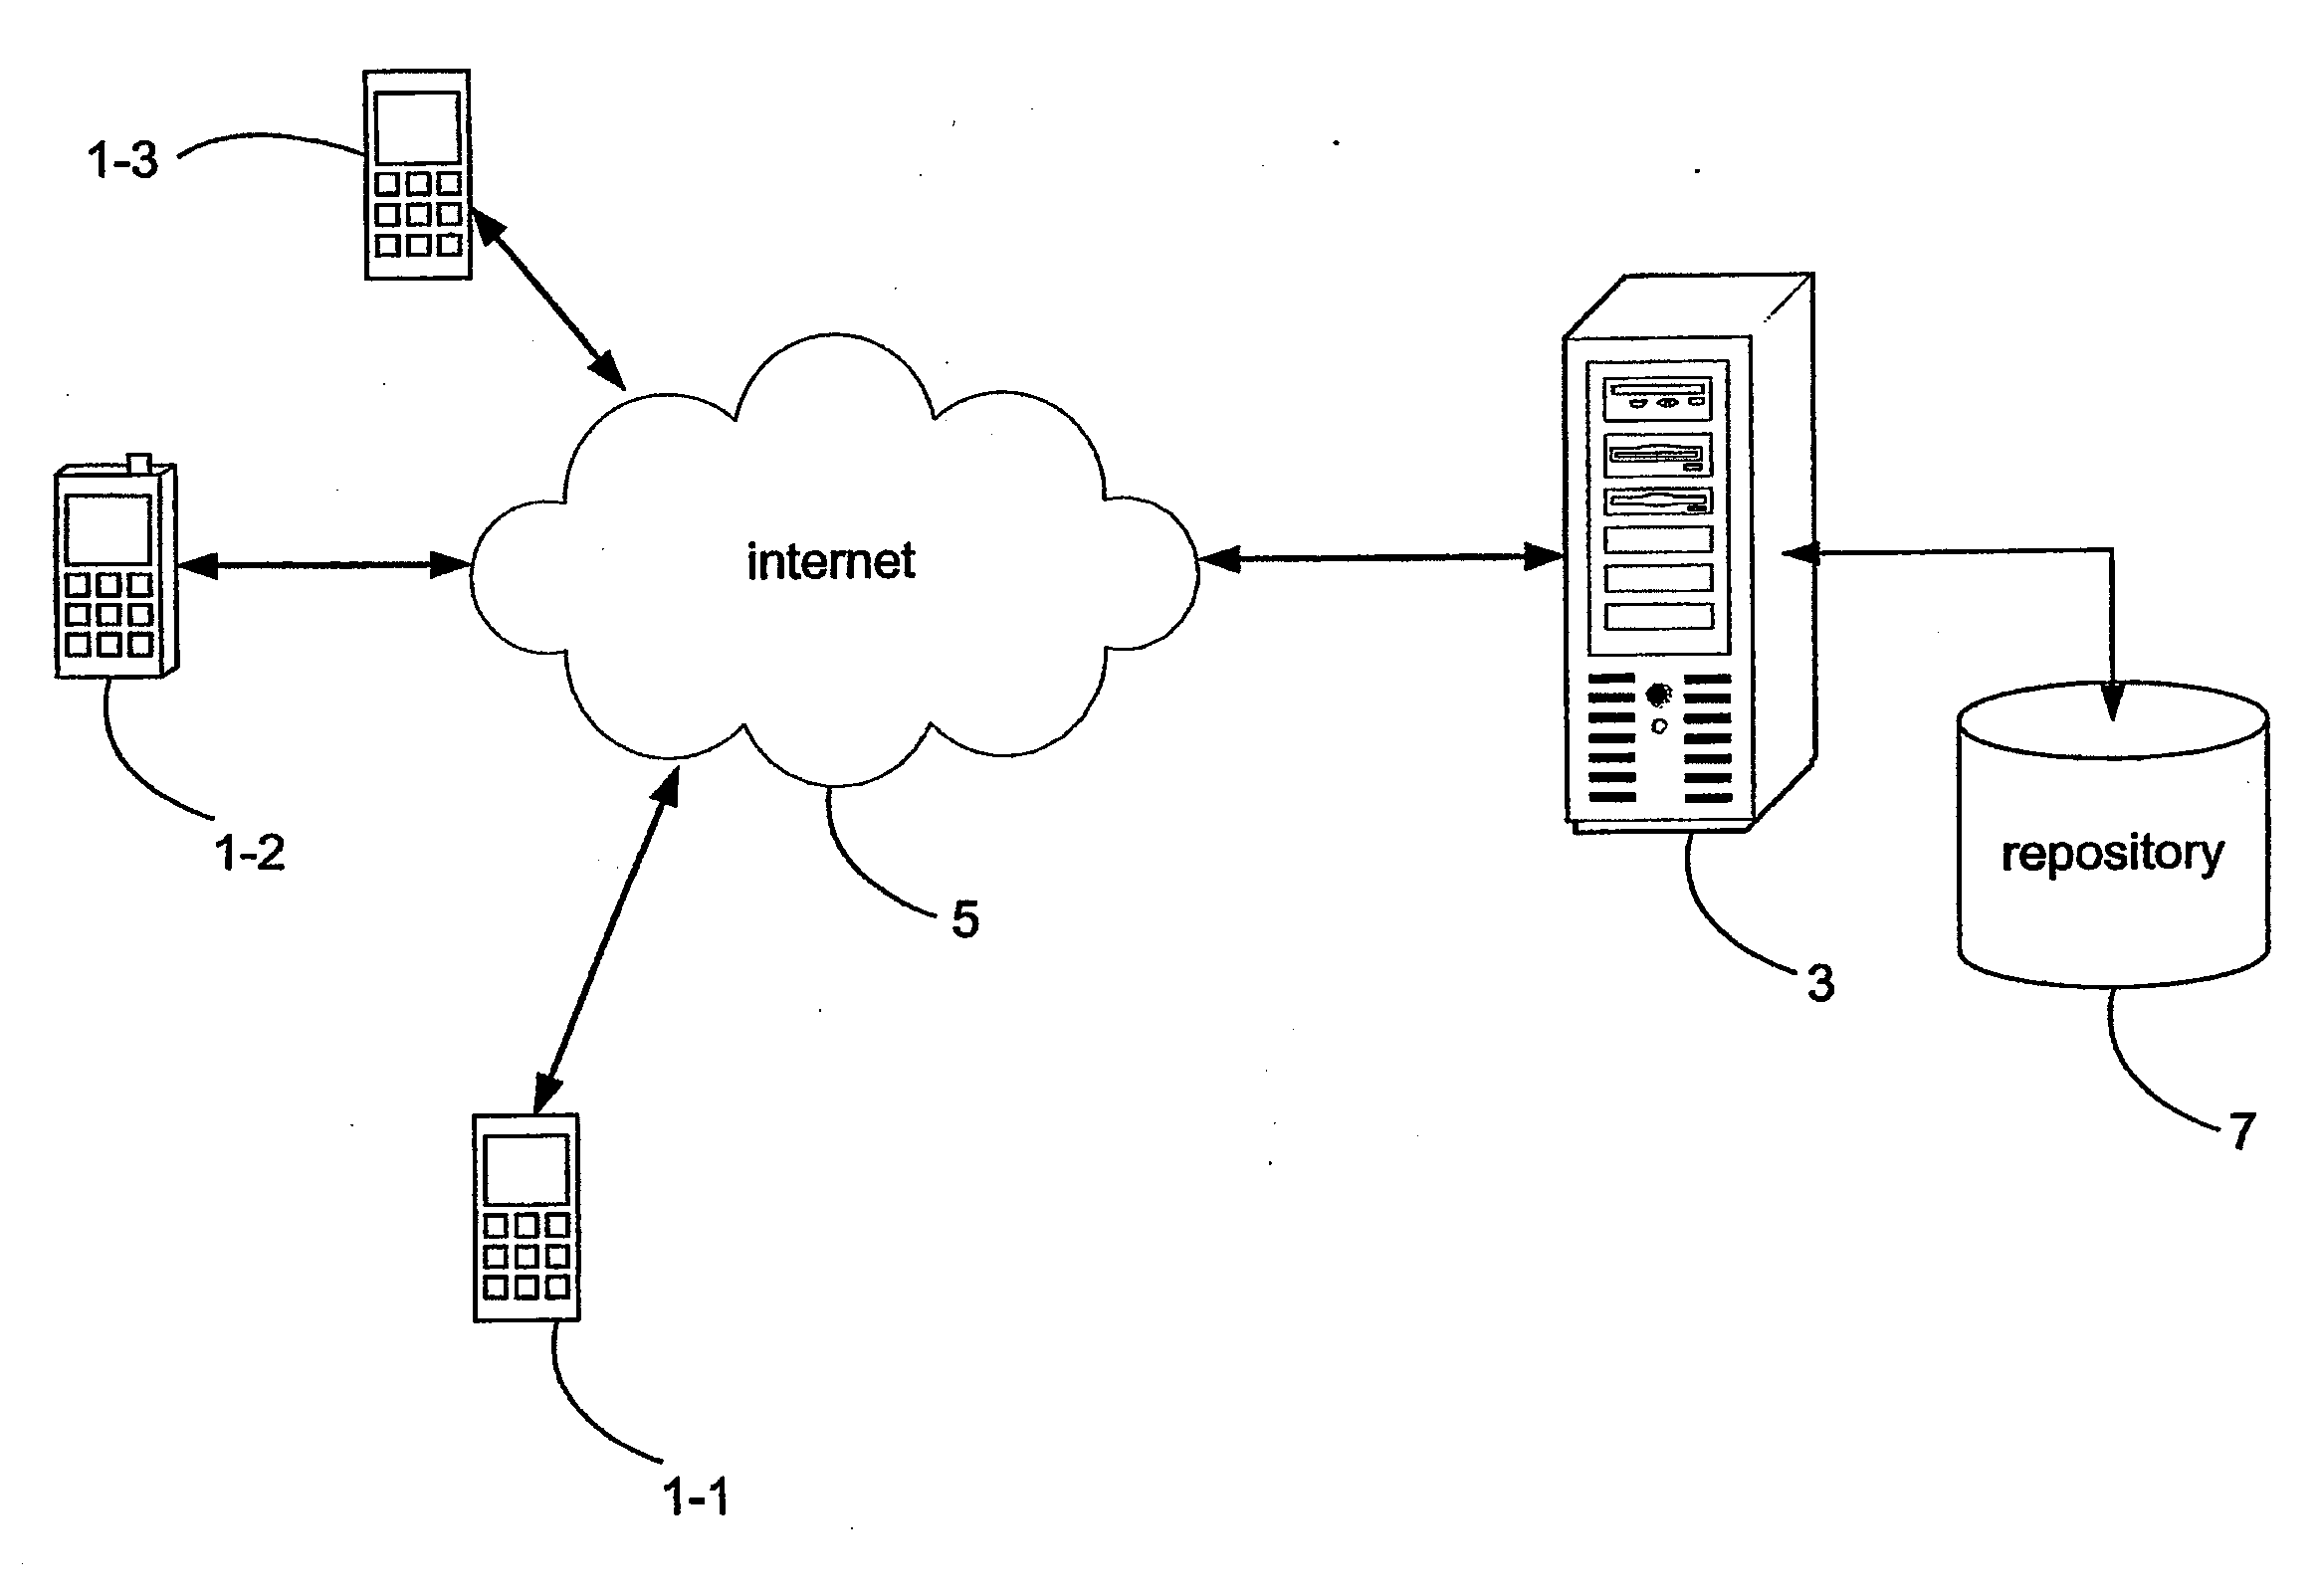 Computing system for providing software components on demand to a mobile device